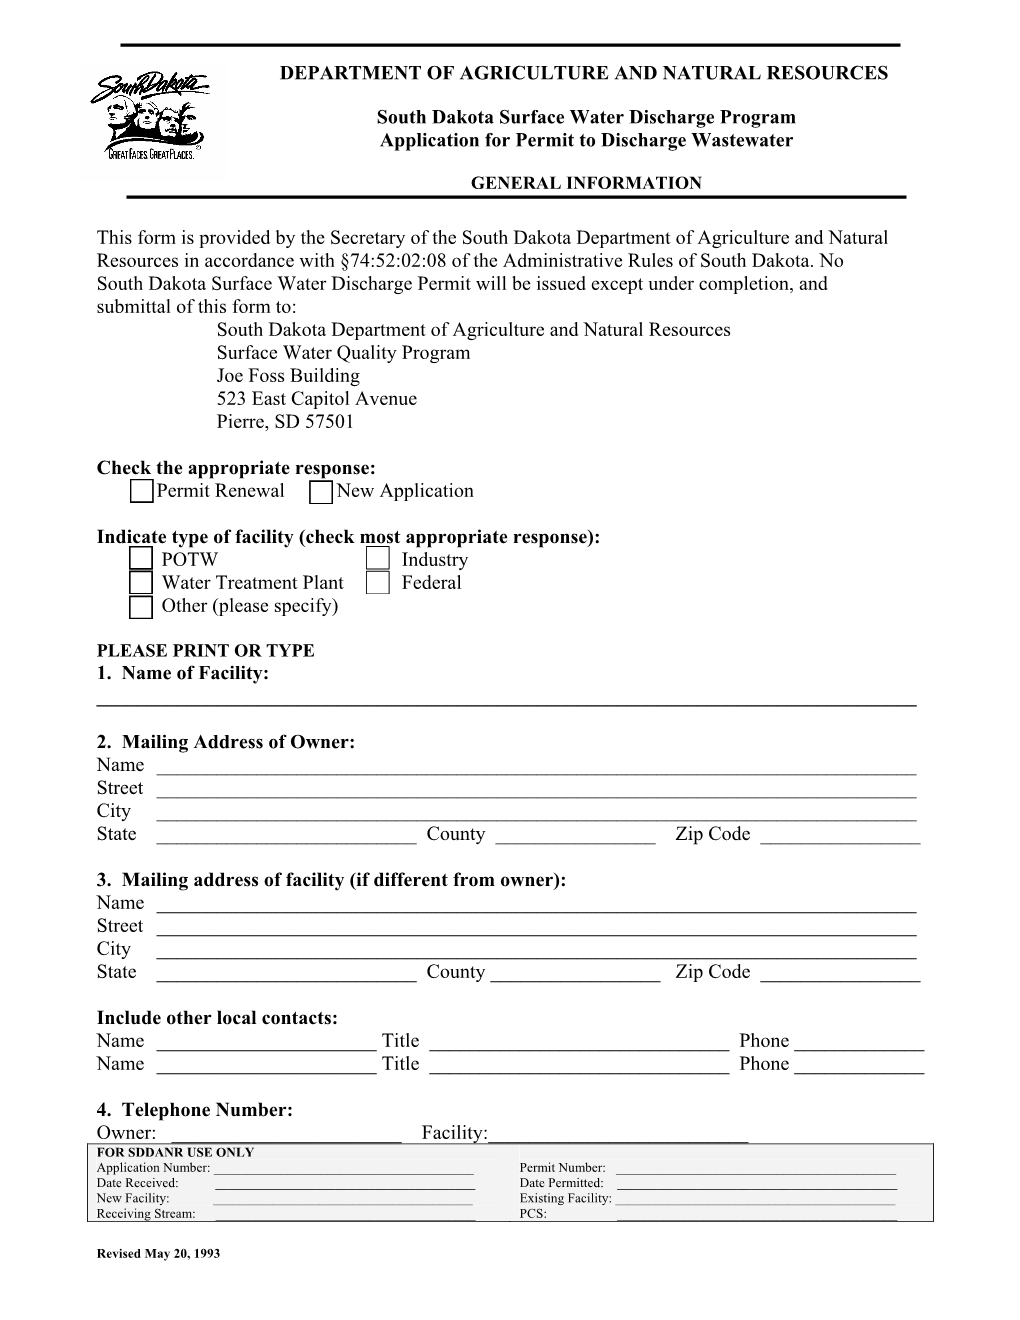 Application Form for Obtaining a Permit to Discharge Industrial Process